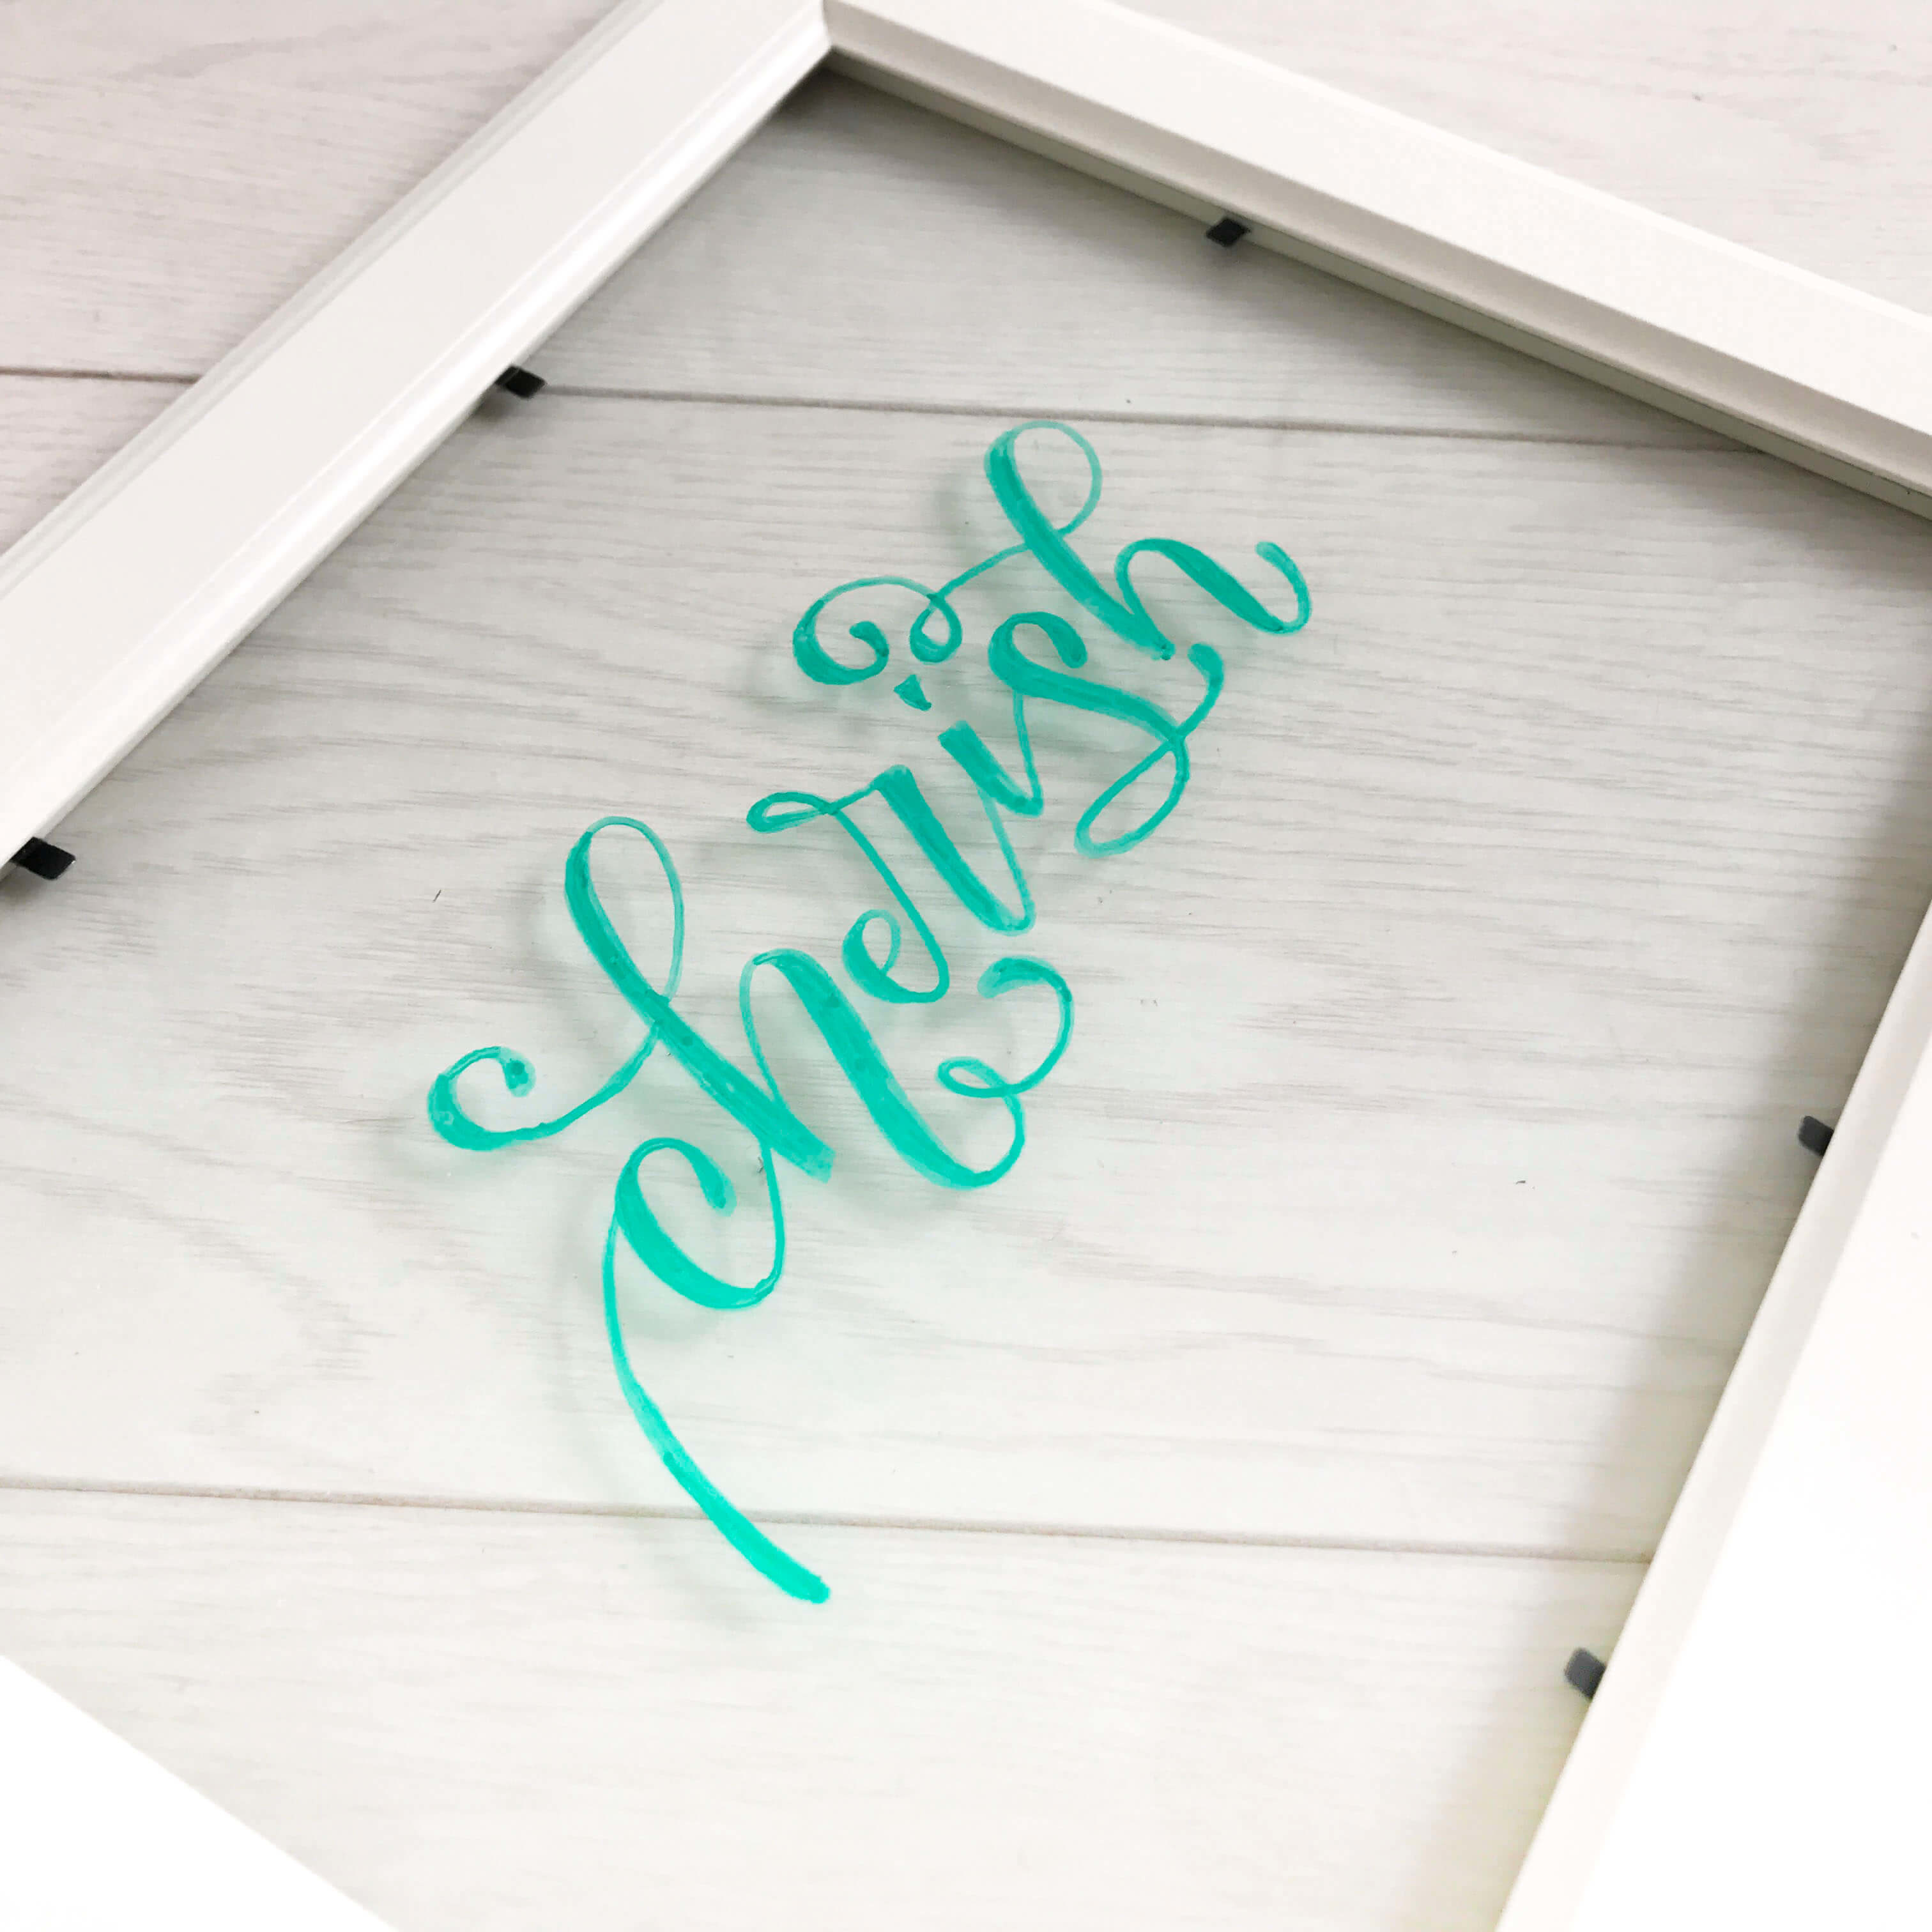 Take your lettering skills to the next level with this advanced online power course from amandaarneill.com taught by Amanda Arneill and Alisse Courter where you will learn how to successfully use and blend colors, embellish your letters and letter on different surfaces like glass, chalkboard, wood and canvas to create stunning pieces.